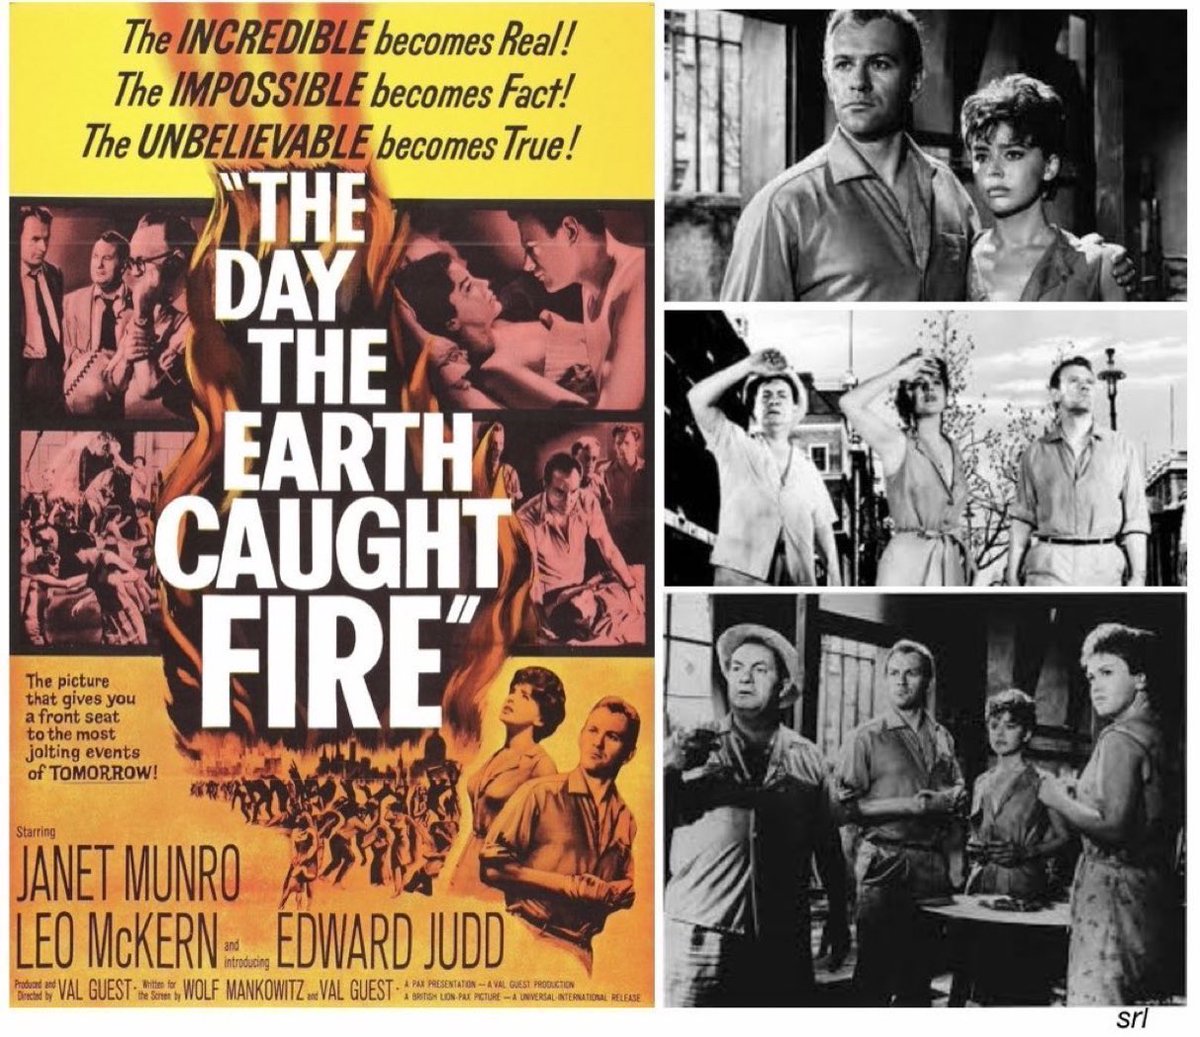 4:40pm TODAY on @TalkingPicsTV

The 1961 #SciFi film🎥 “The Day The Earth Caught Fire” directed by #ValGuest & co-written with #WolfMankowitz

🌟#JanetMunro #LeoMcKern #EdwardJudd
+ #MichaelGoodliffe #BernardBraden #ReginaldBeckwith
+ a glimpse of #MichaelCaine